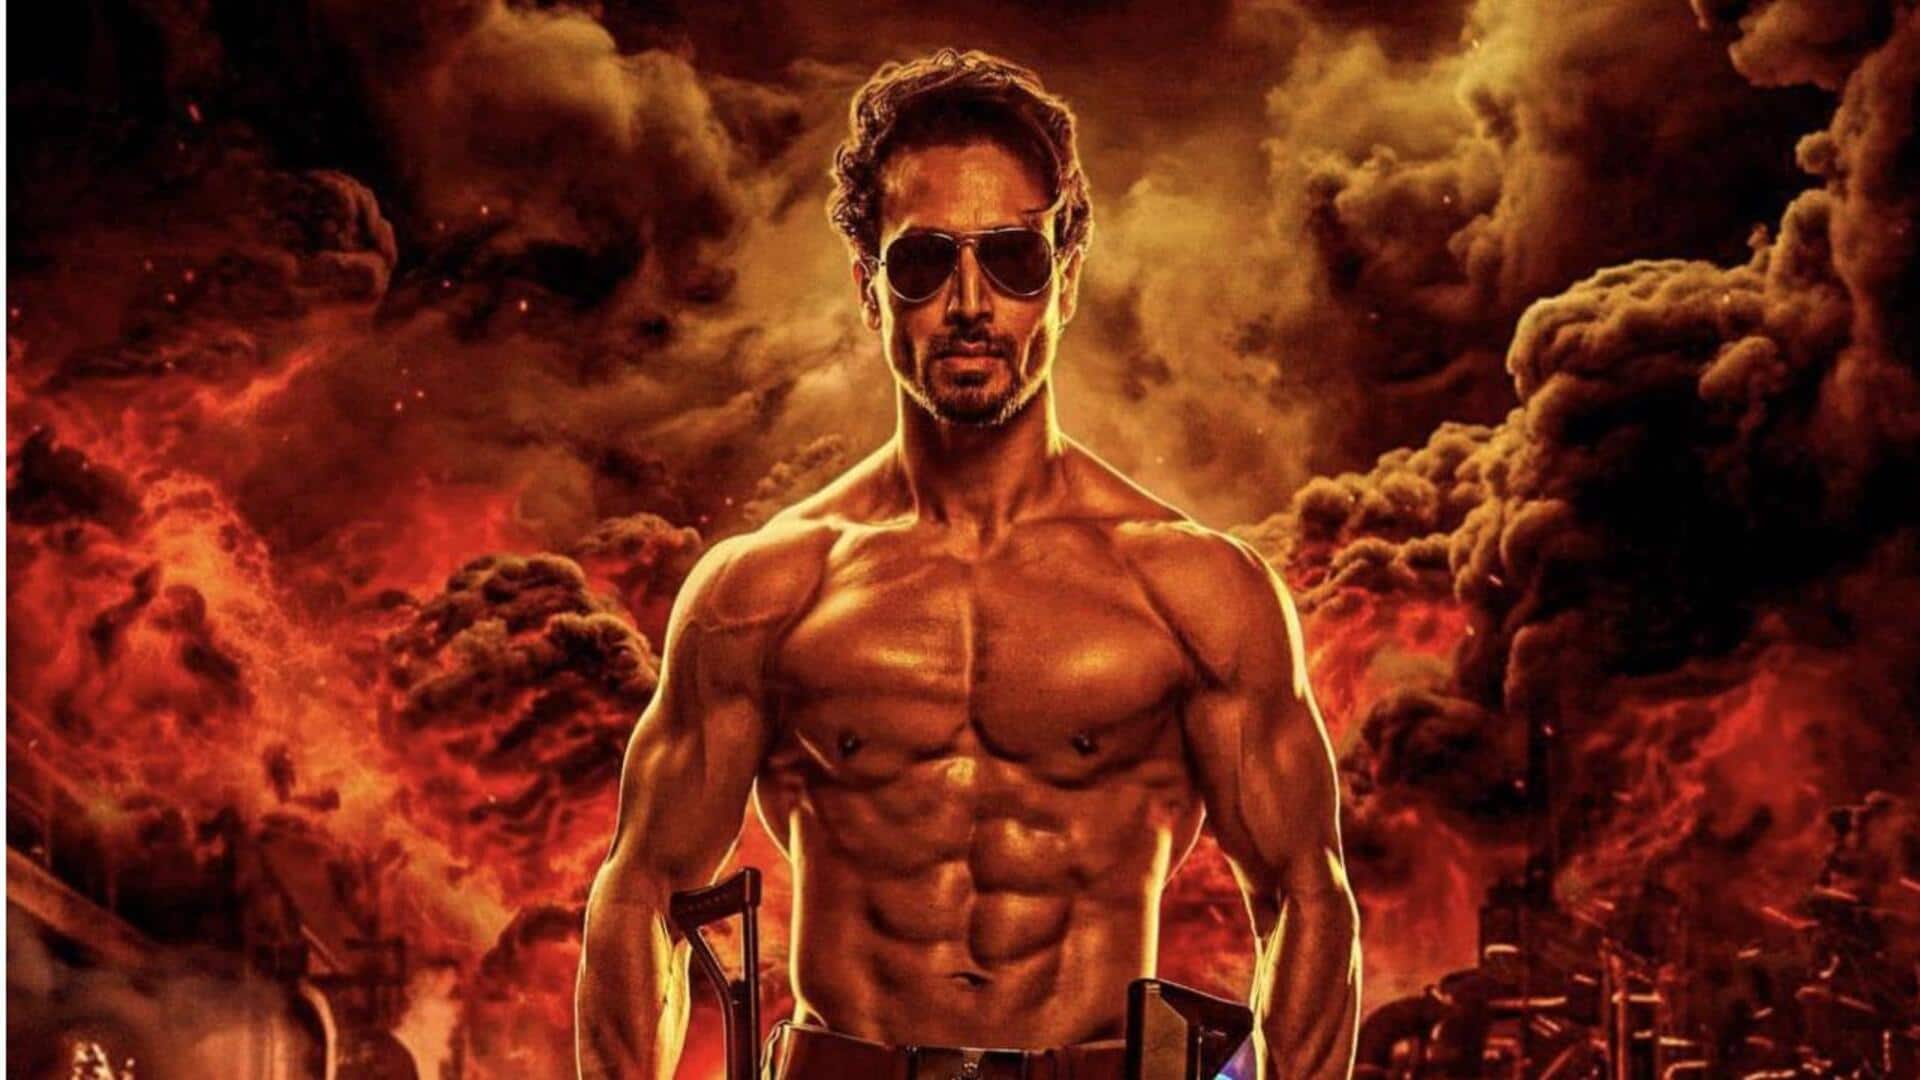 Tiger Shroff joins 'Singham Again' as ACP Satya—check first posters